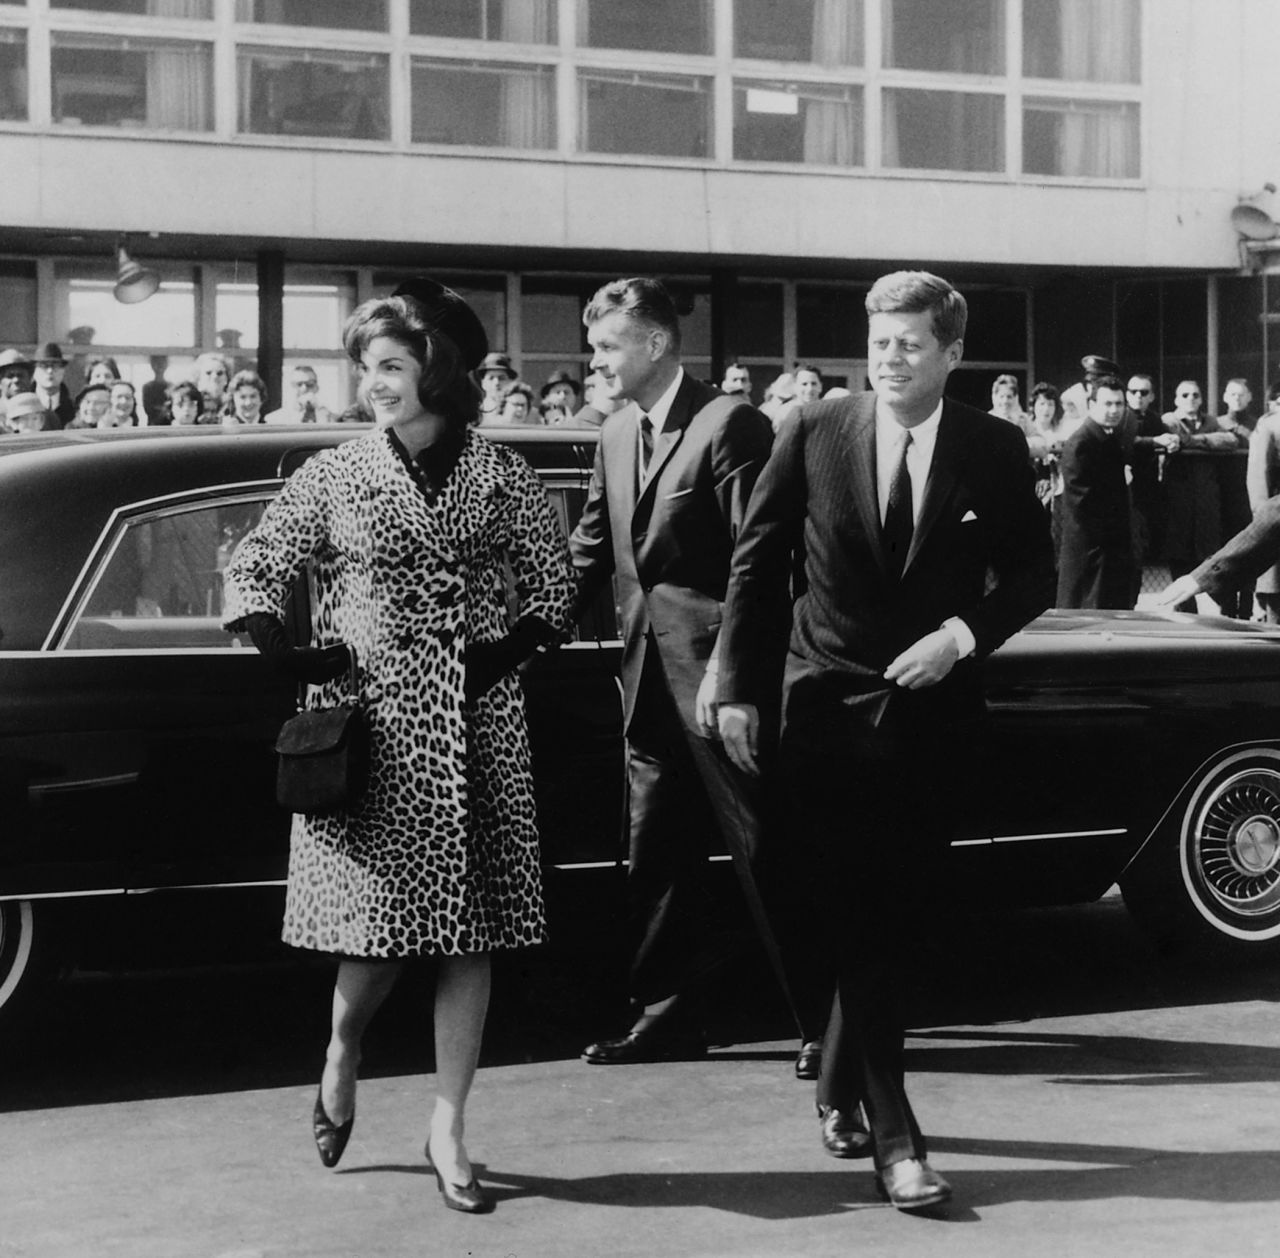 Escorted by President Kennedy, Jacqueline Kennedy departs for trip to India and Pakistan wearing an Oleg Cassini leopard skin coat in 1962.